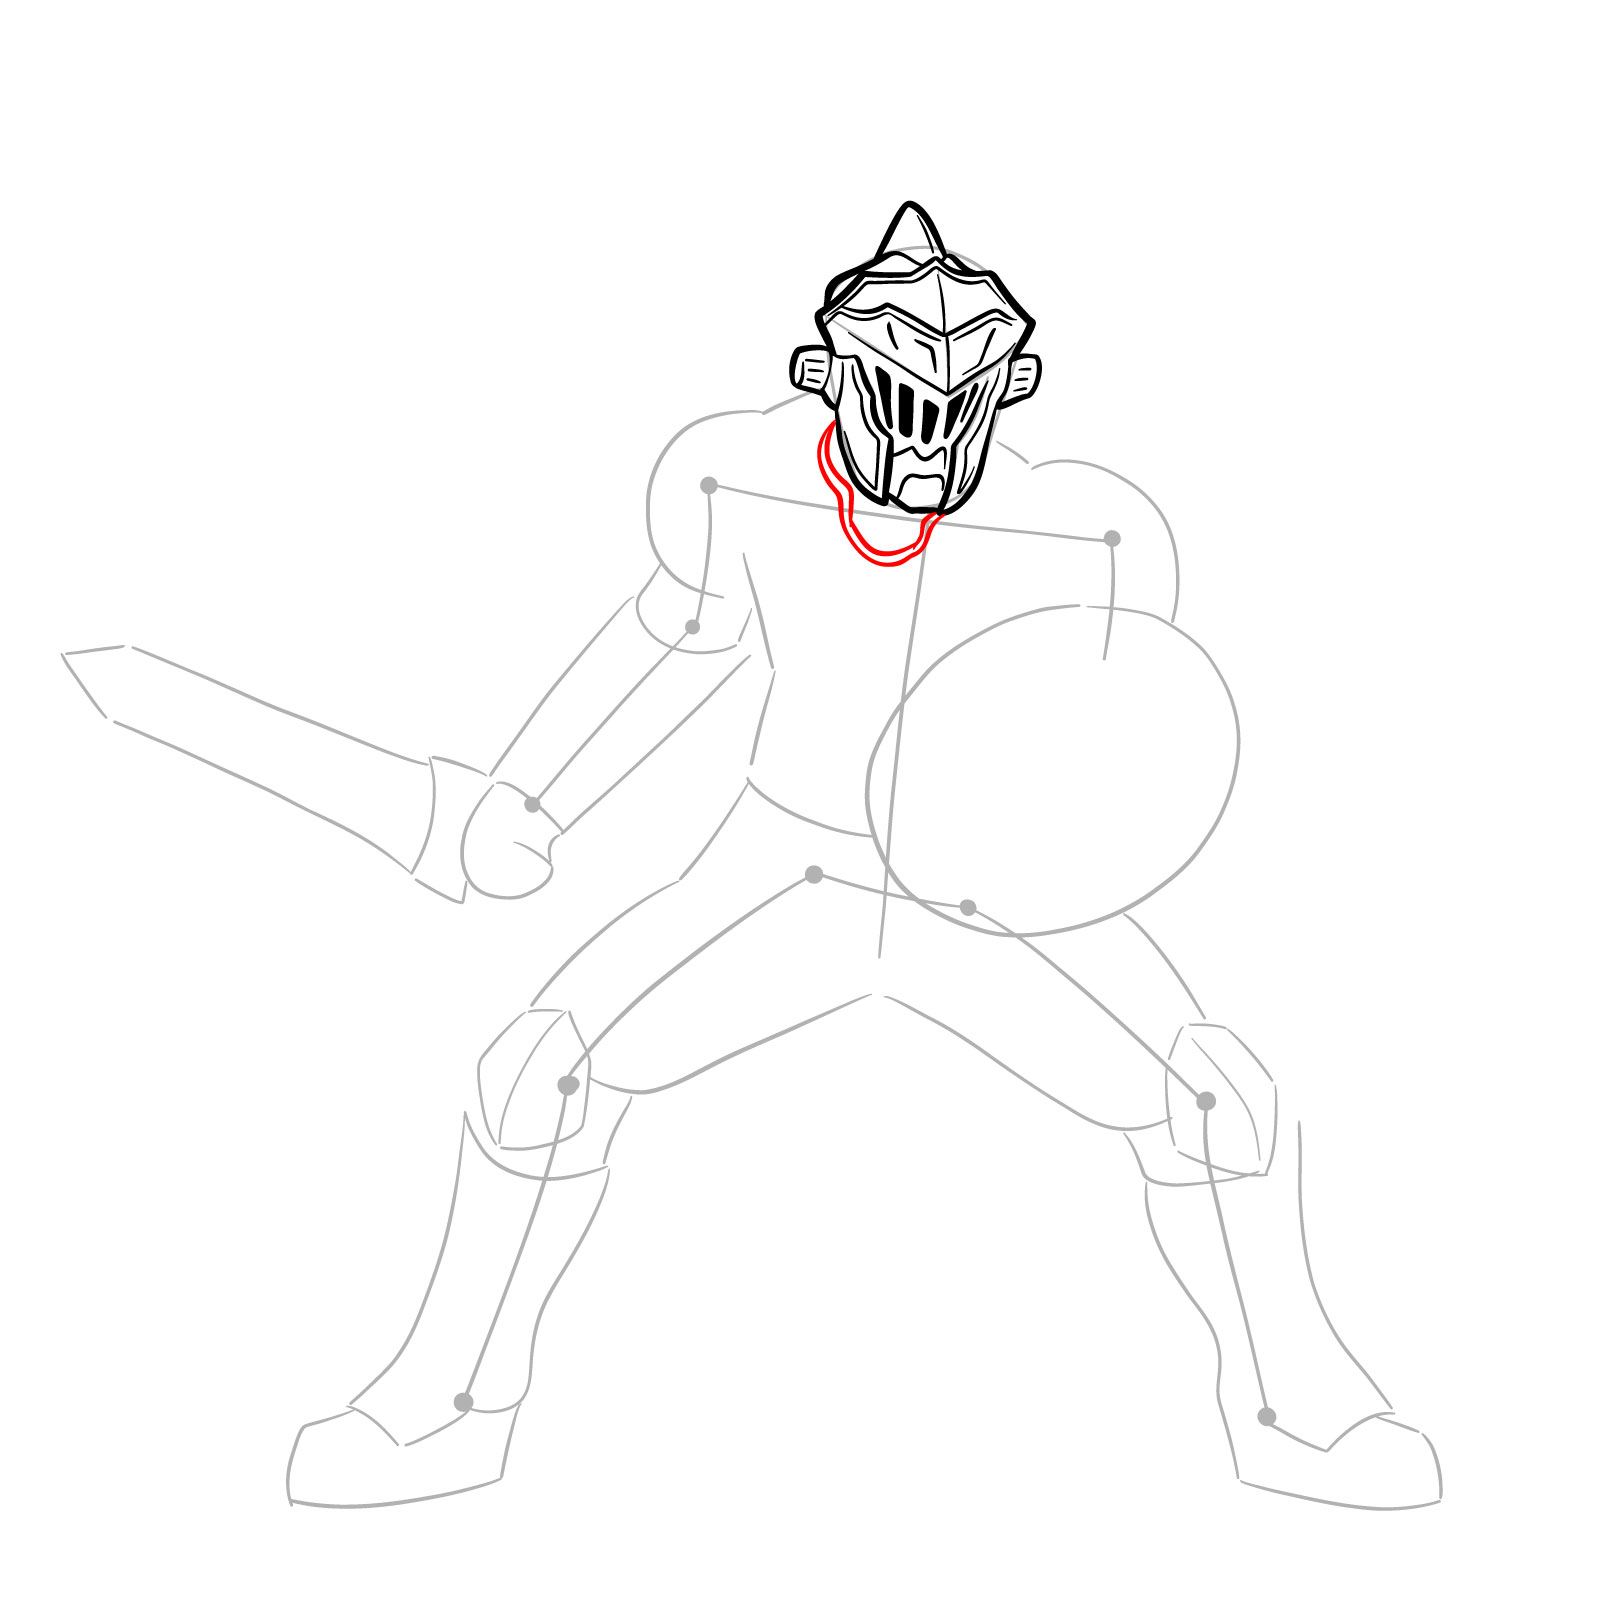 How to Draw Goblin Slayer in battle stance - step 11